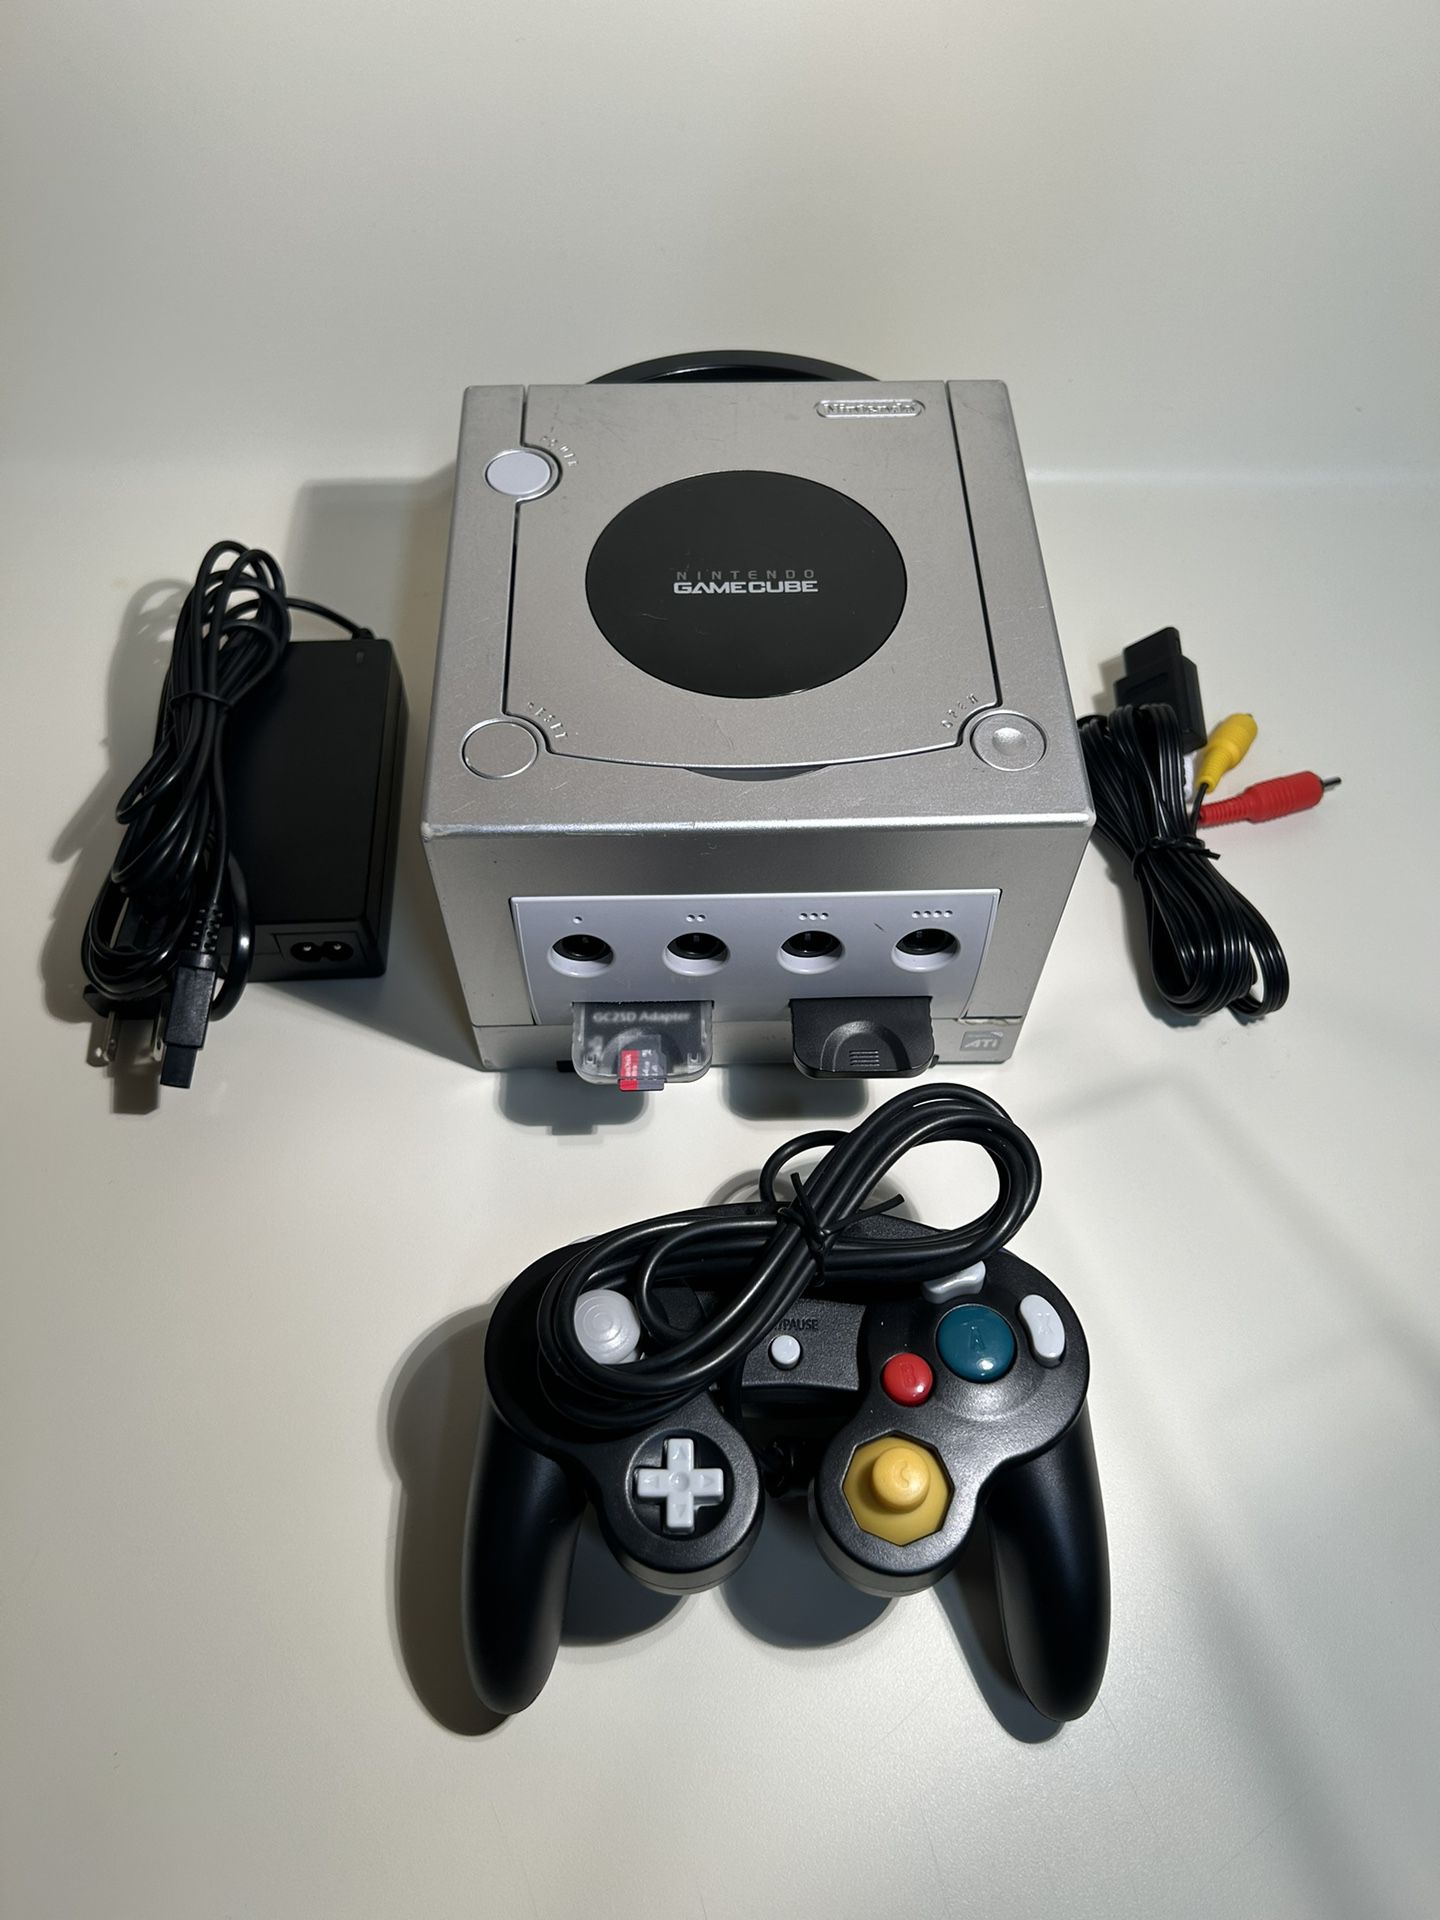 Nintendo Gamecube /PICOBOOT Modded/ RECAPPED DISC DRIVE/ LED MOD/ LOADED WITH GAMES NO GAMEBOY PLAYER DISC NEEDED